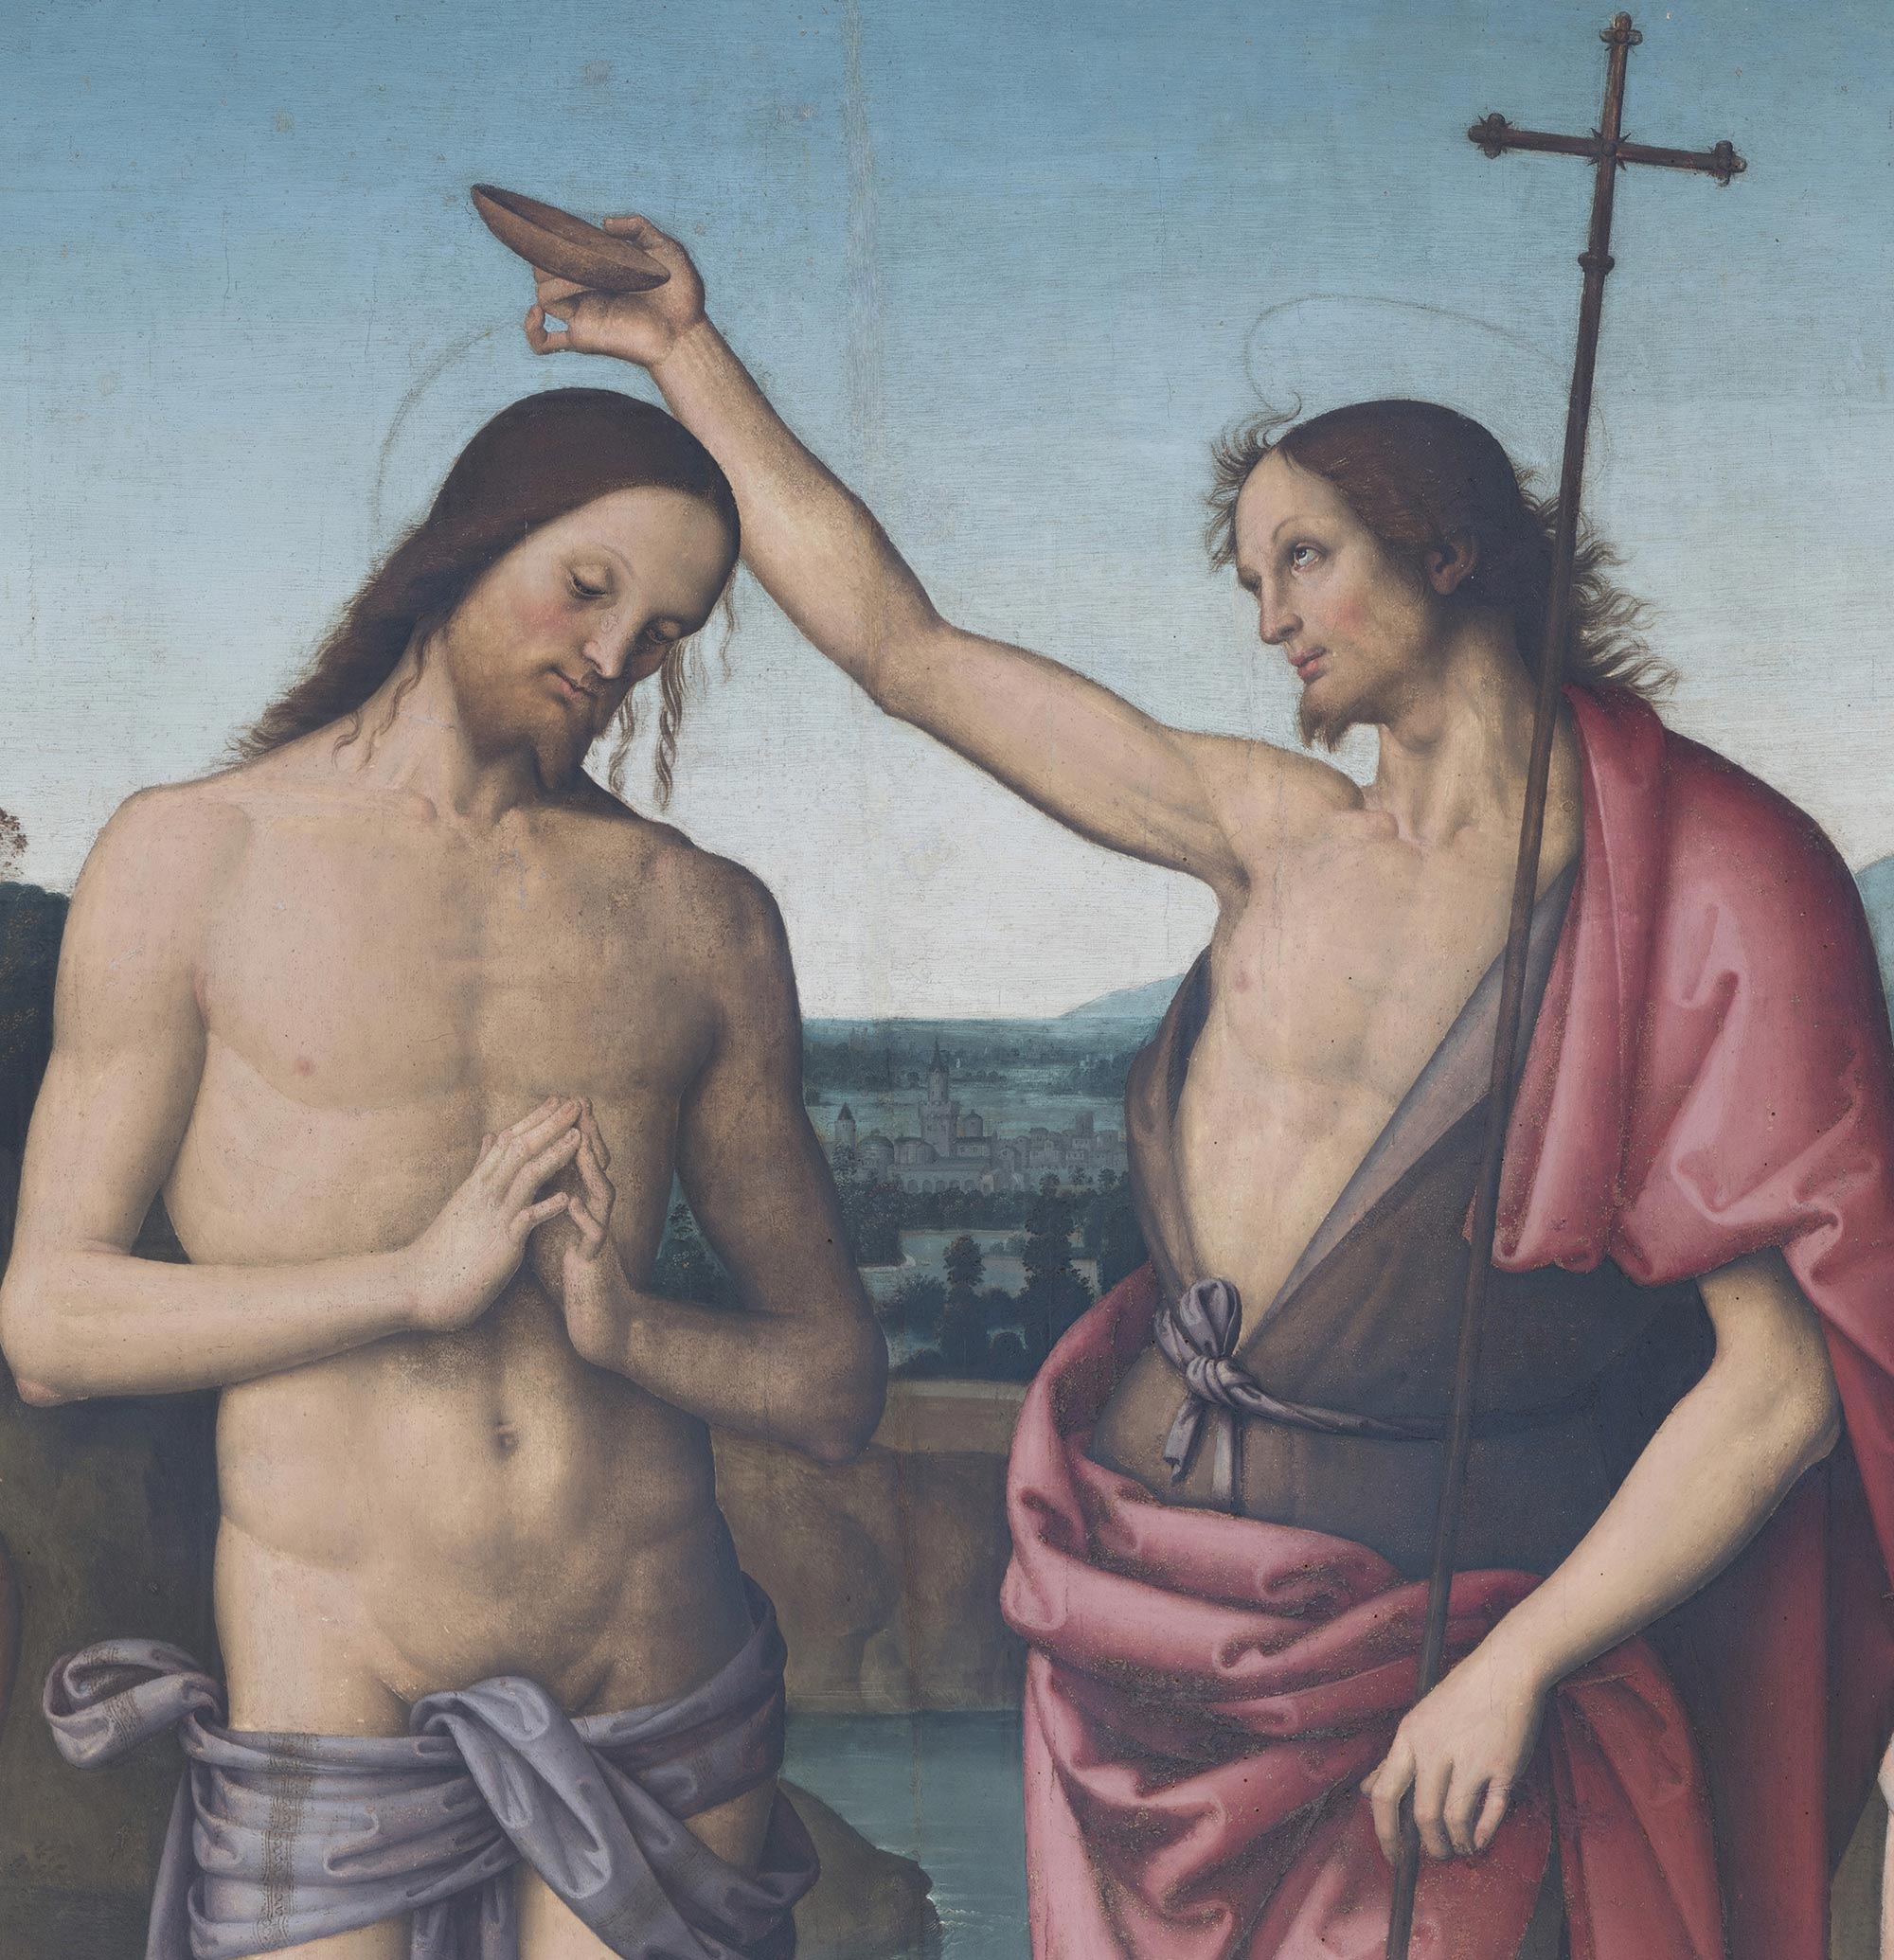 The figures of Christ and John the Baptist